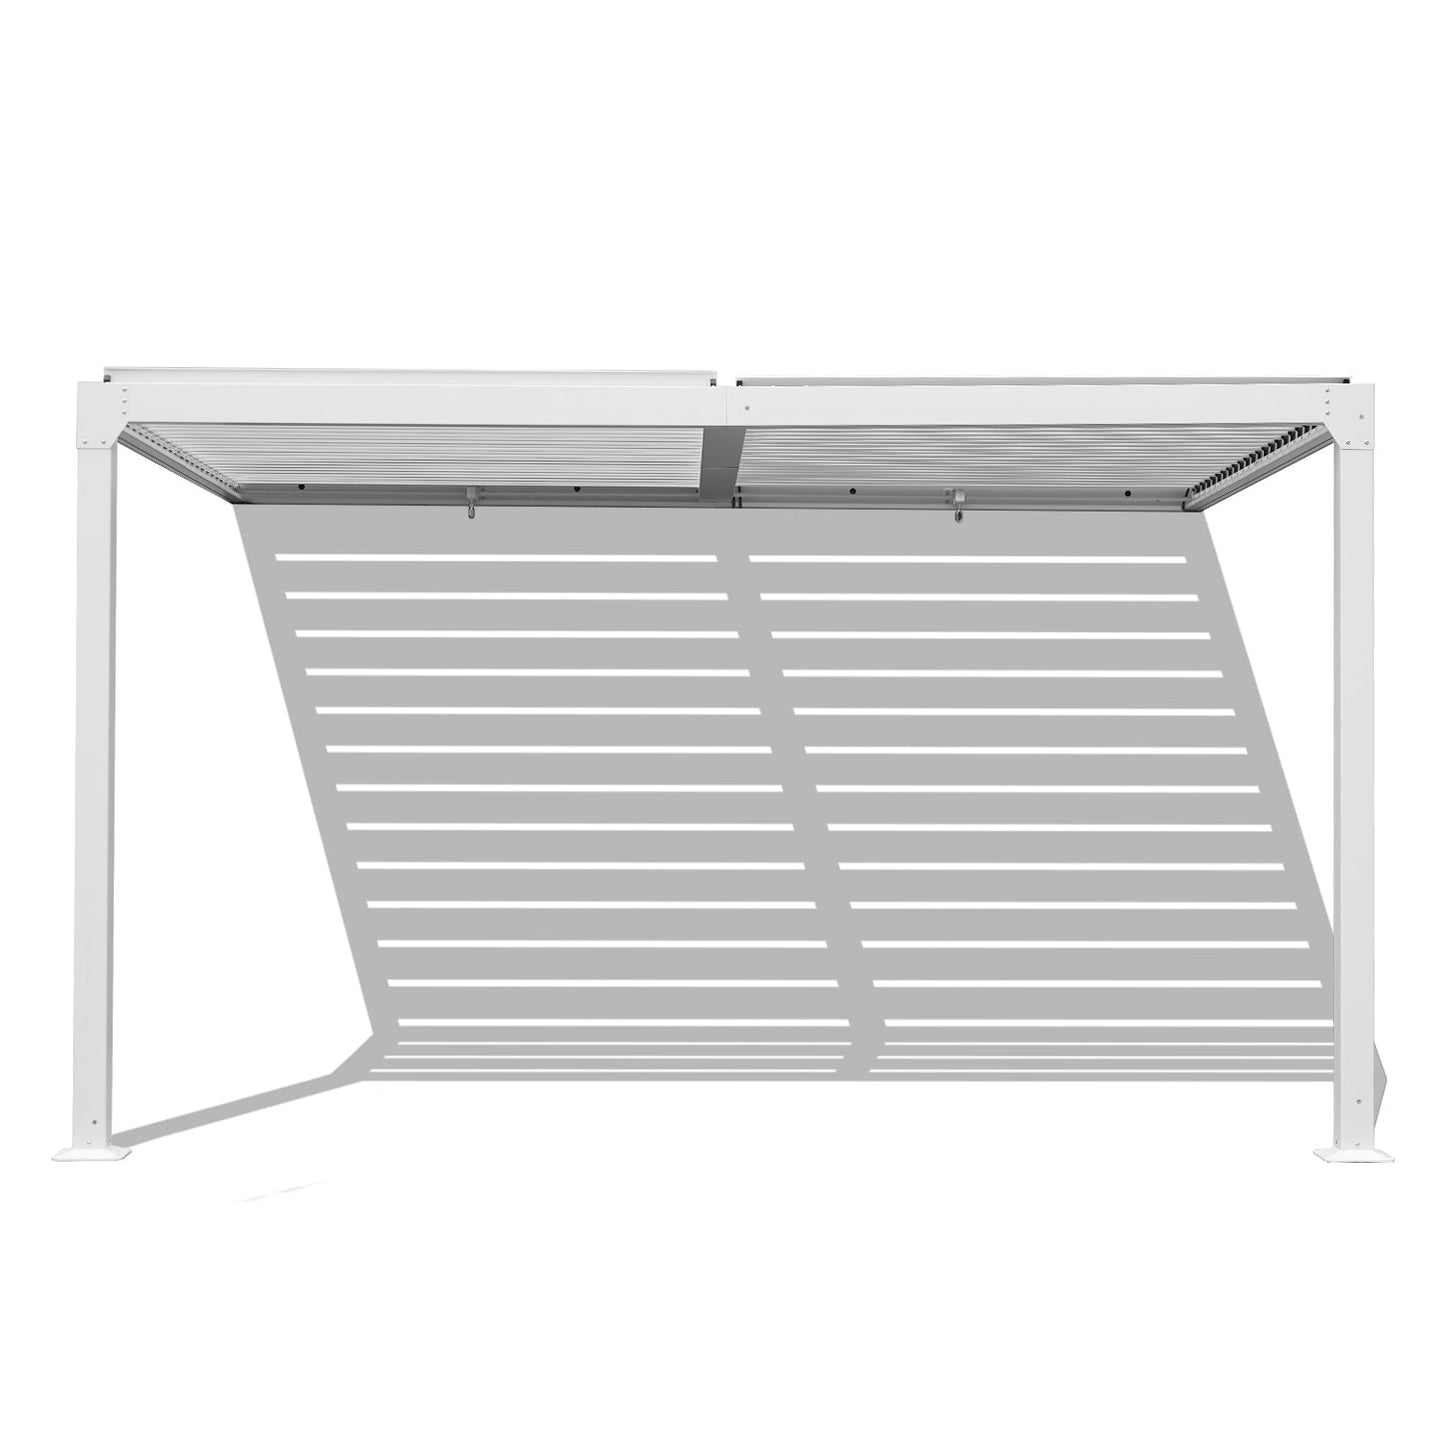 13 x 10 ft. Outdoor Aluminum Wall Mounted Louvered Pergola, Sun Shade Shelter with 2 Adjustable Panels  - Dark Gray/White Louvered Pergola Aoodor LLC White  